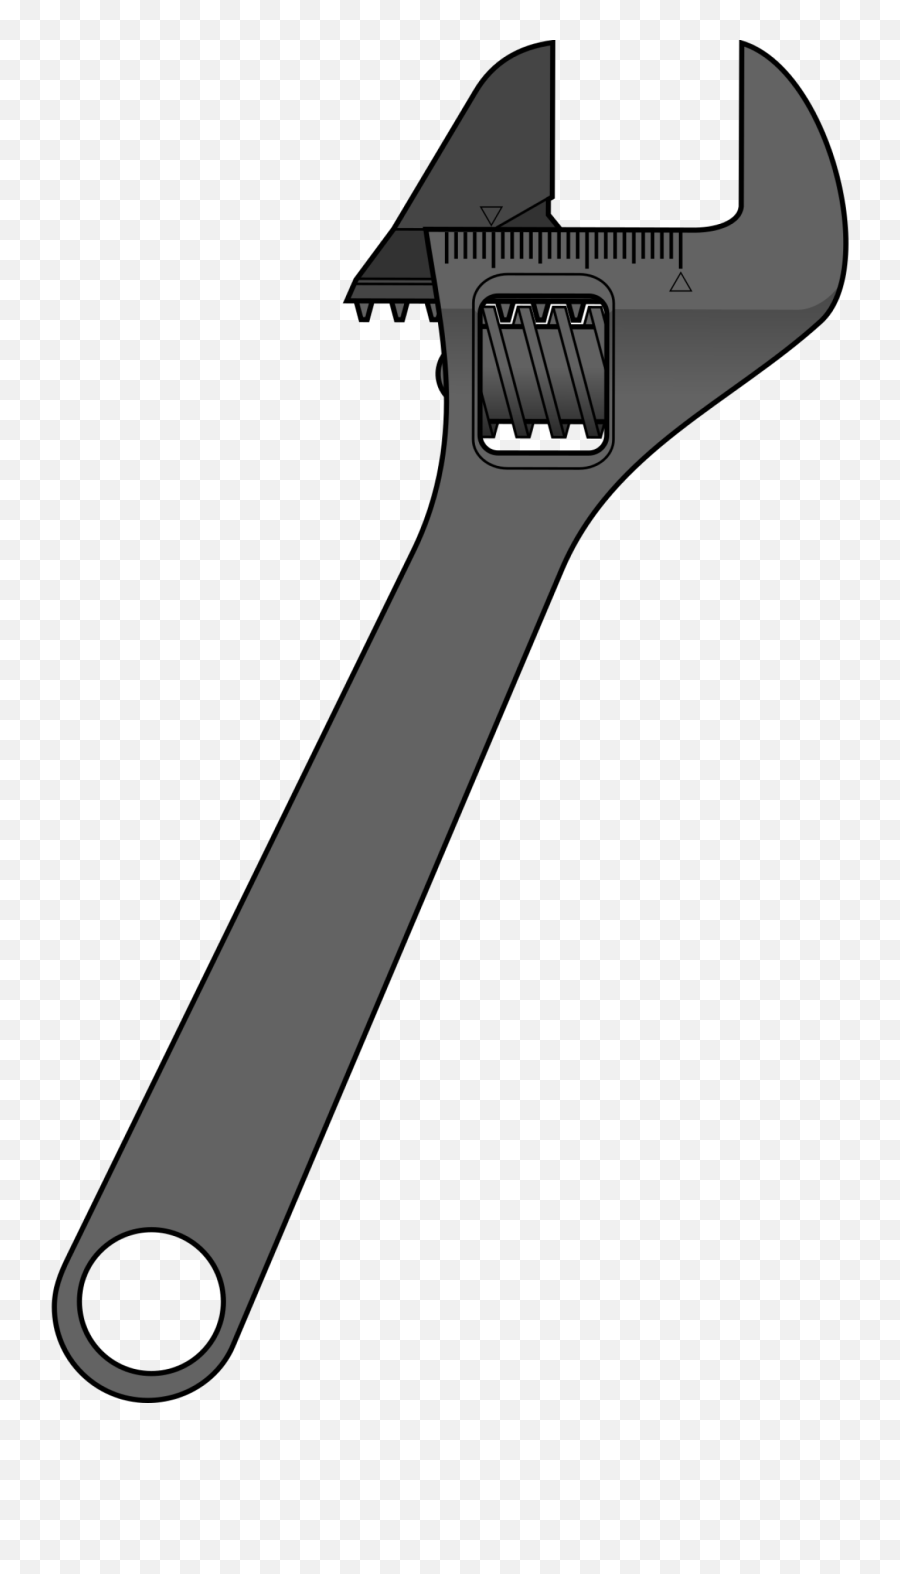 Wrench Clipart Png 2 Station - Adjustable Wrench Clip Art,Wrench Clipart Png